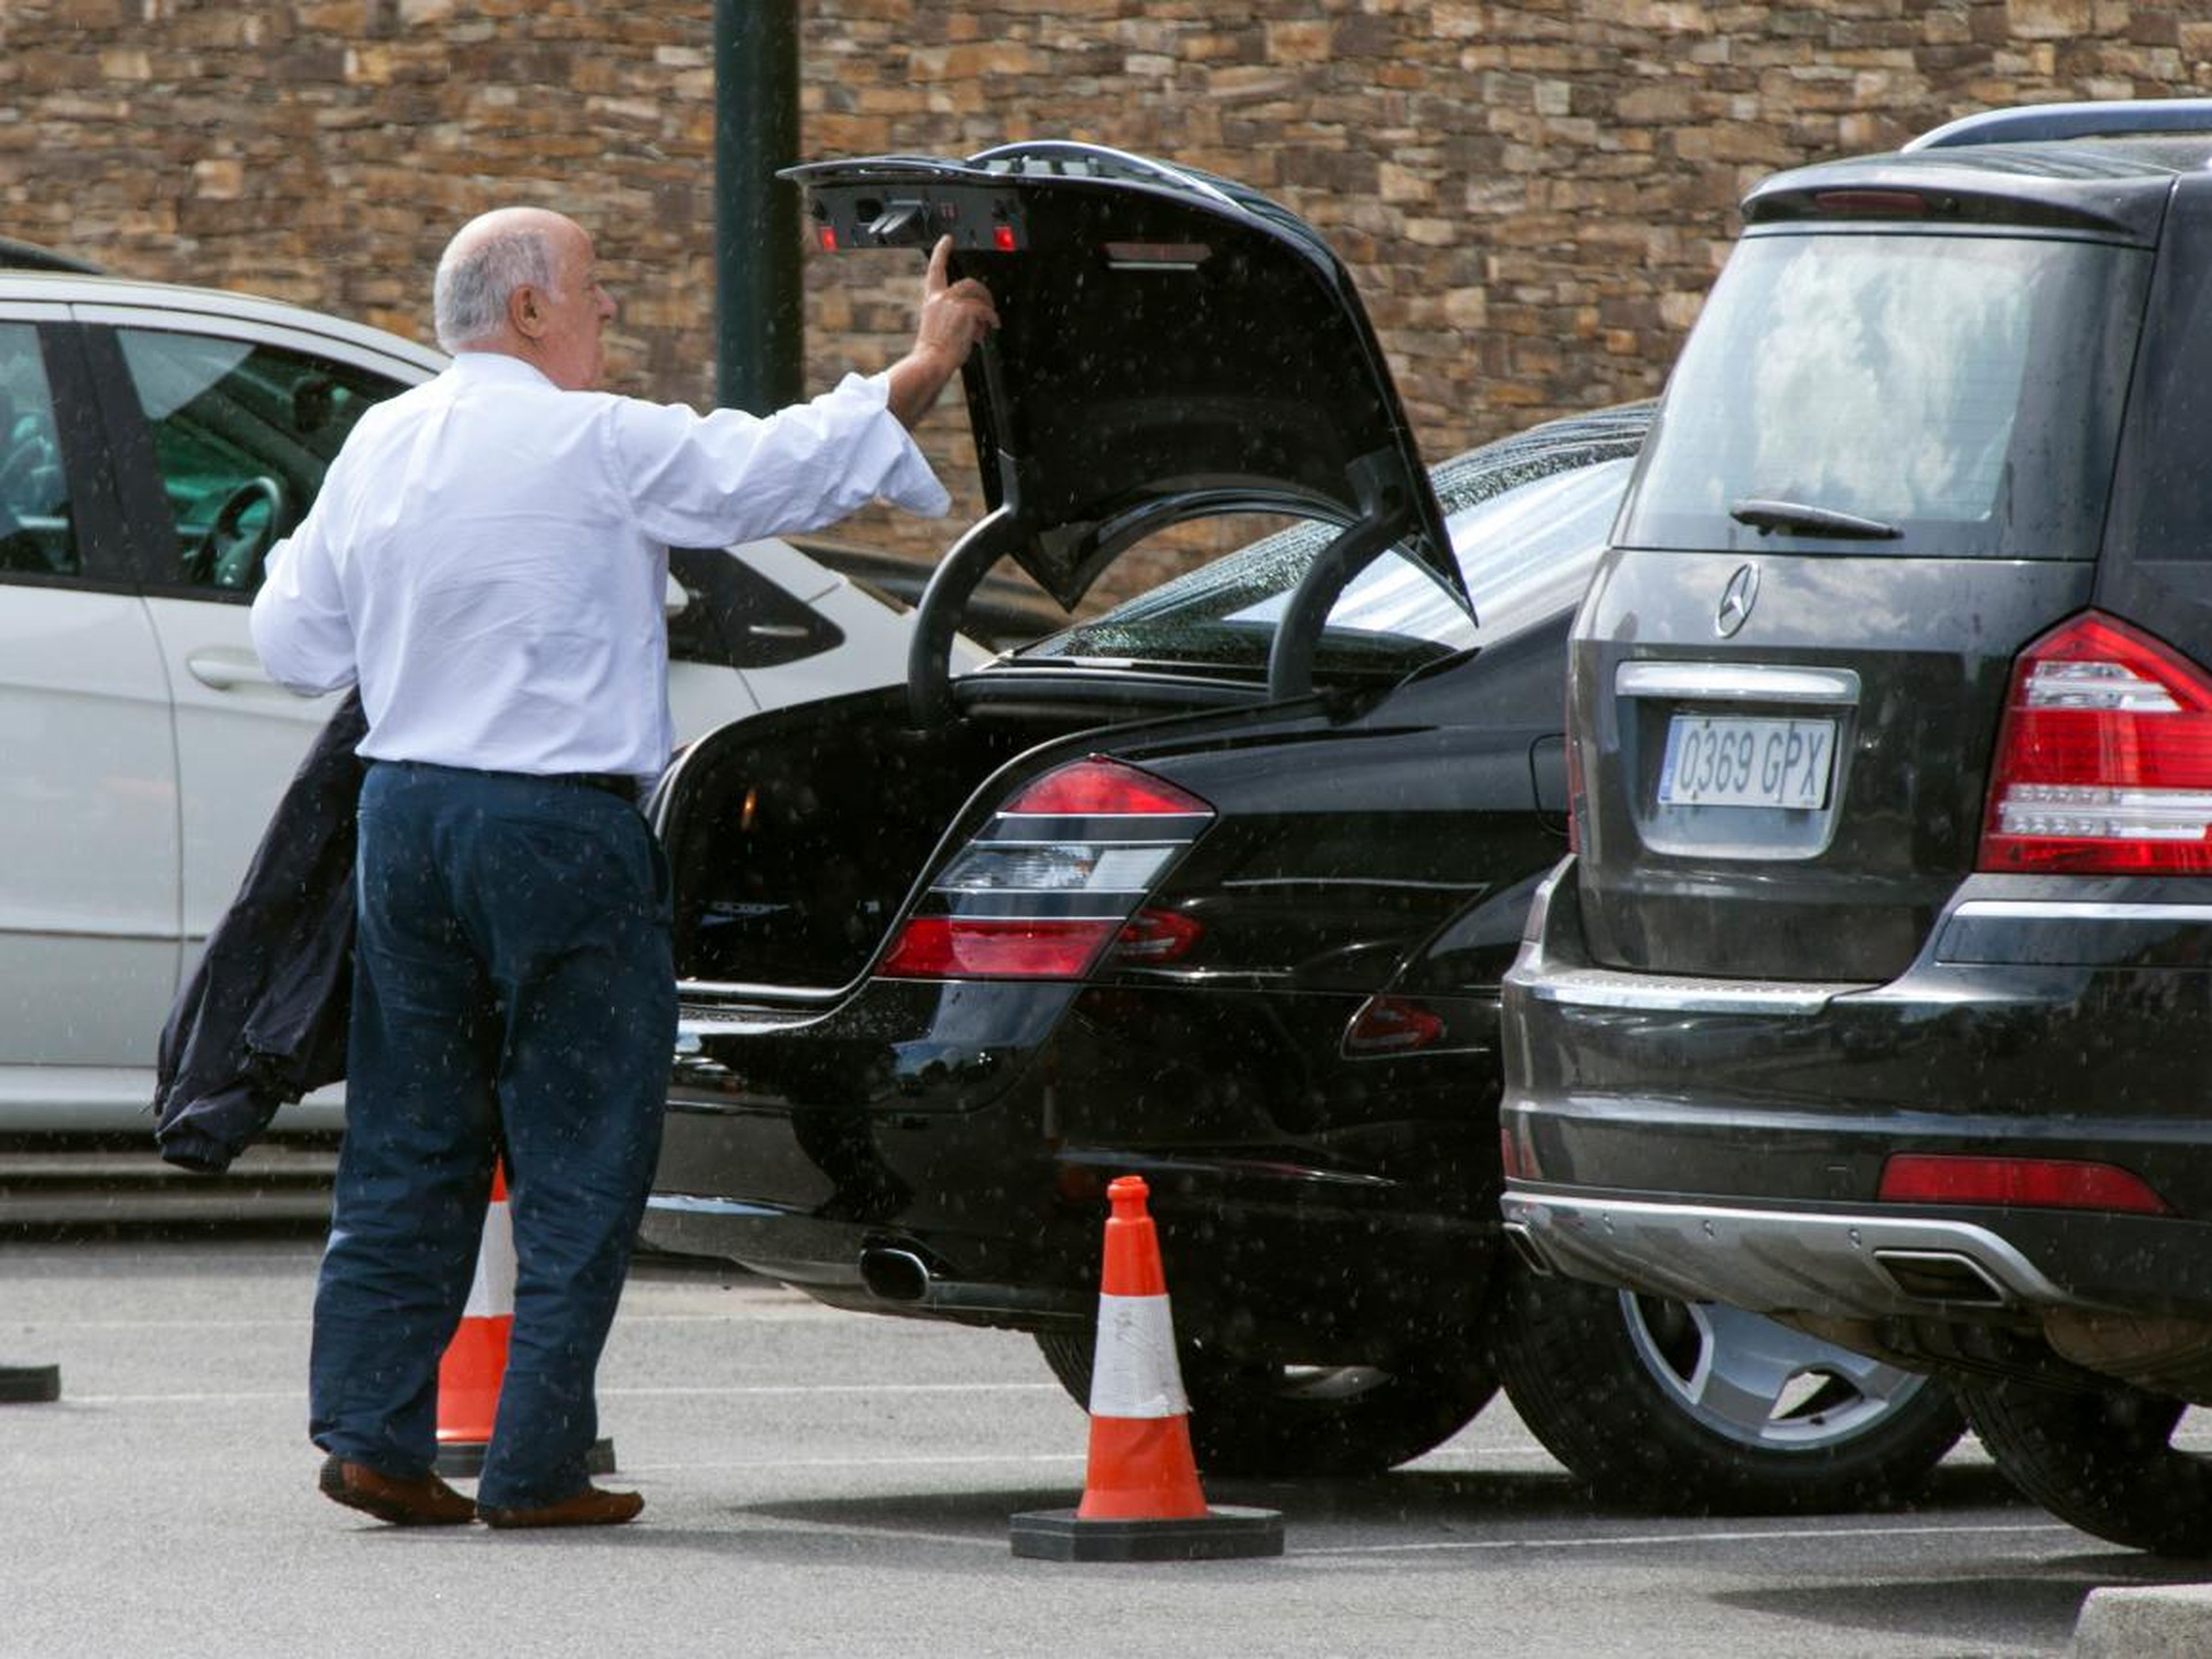 In 2012, it was reported that Ortega drives an Audi A8 luxury sedan said to be more about comfort than luxury, but it's unclear what he drives now.